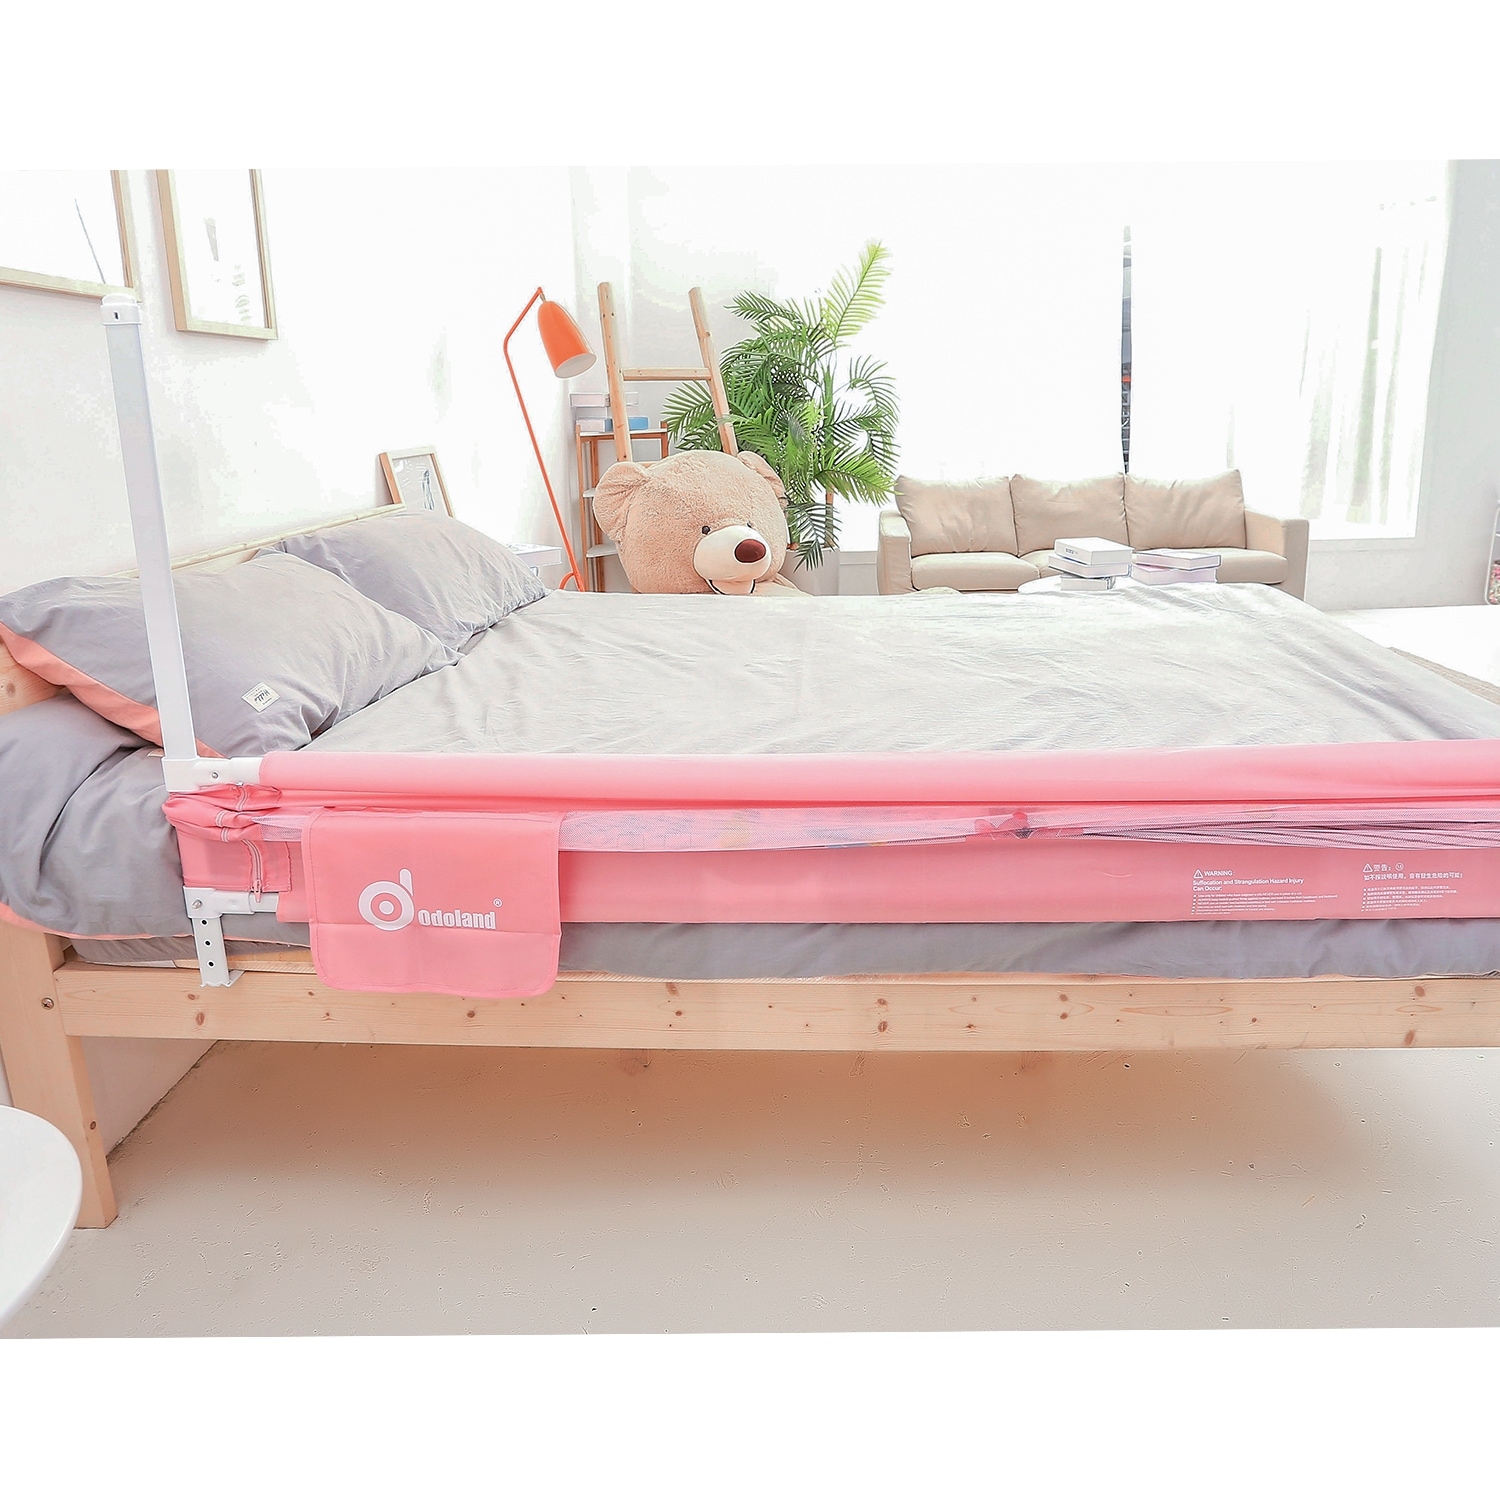 baby bed wall